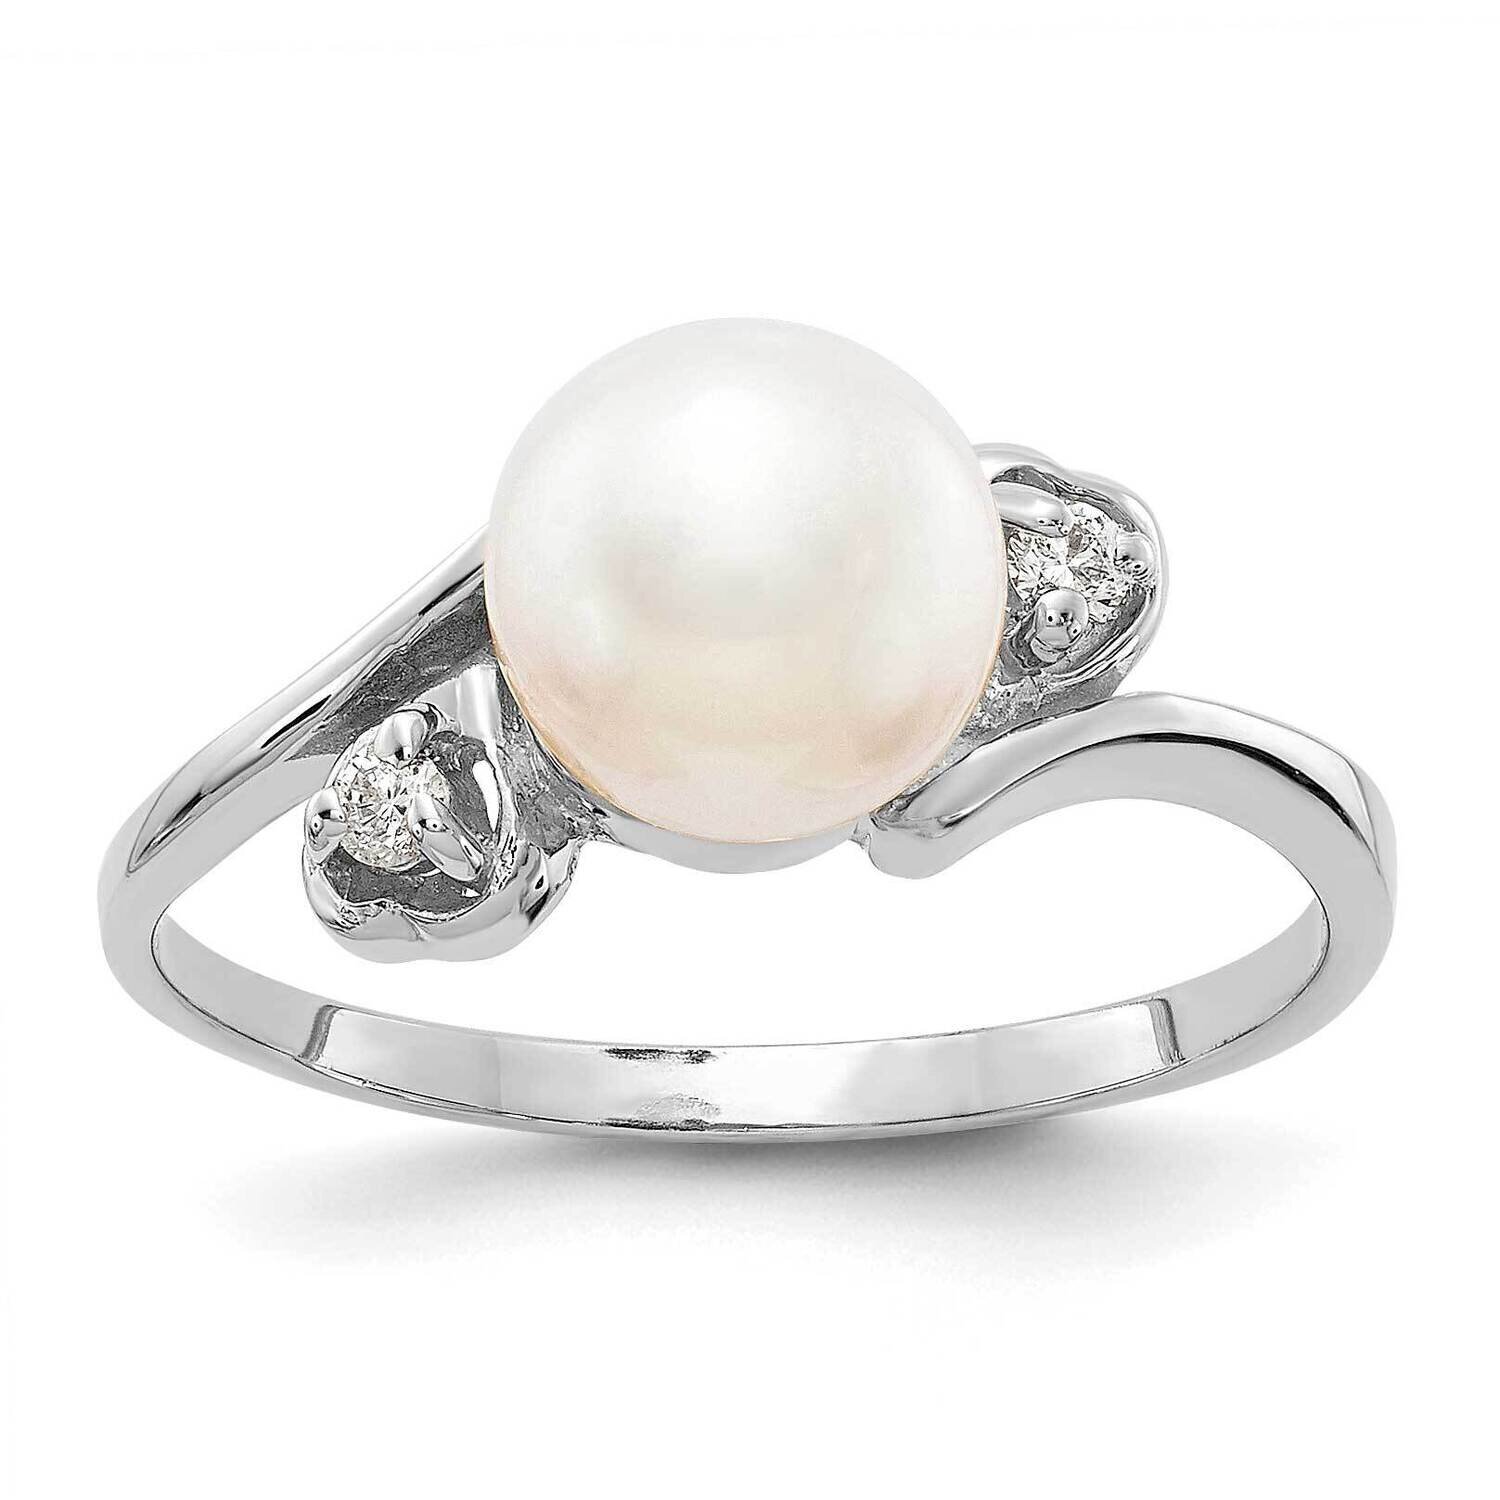 7mm Fw Cultured Pearl Aaa Diamond Ring 14k White Gold Y4393PL/AAA